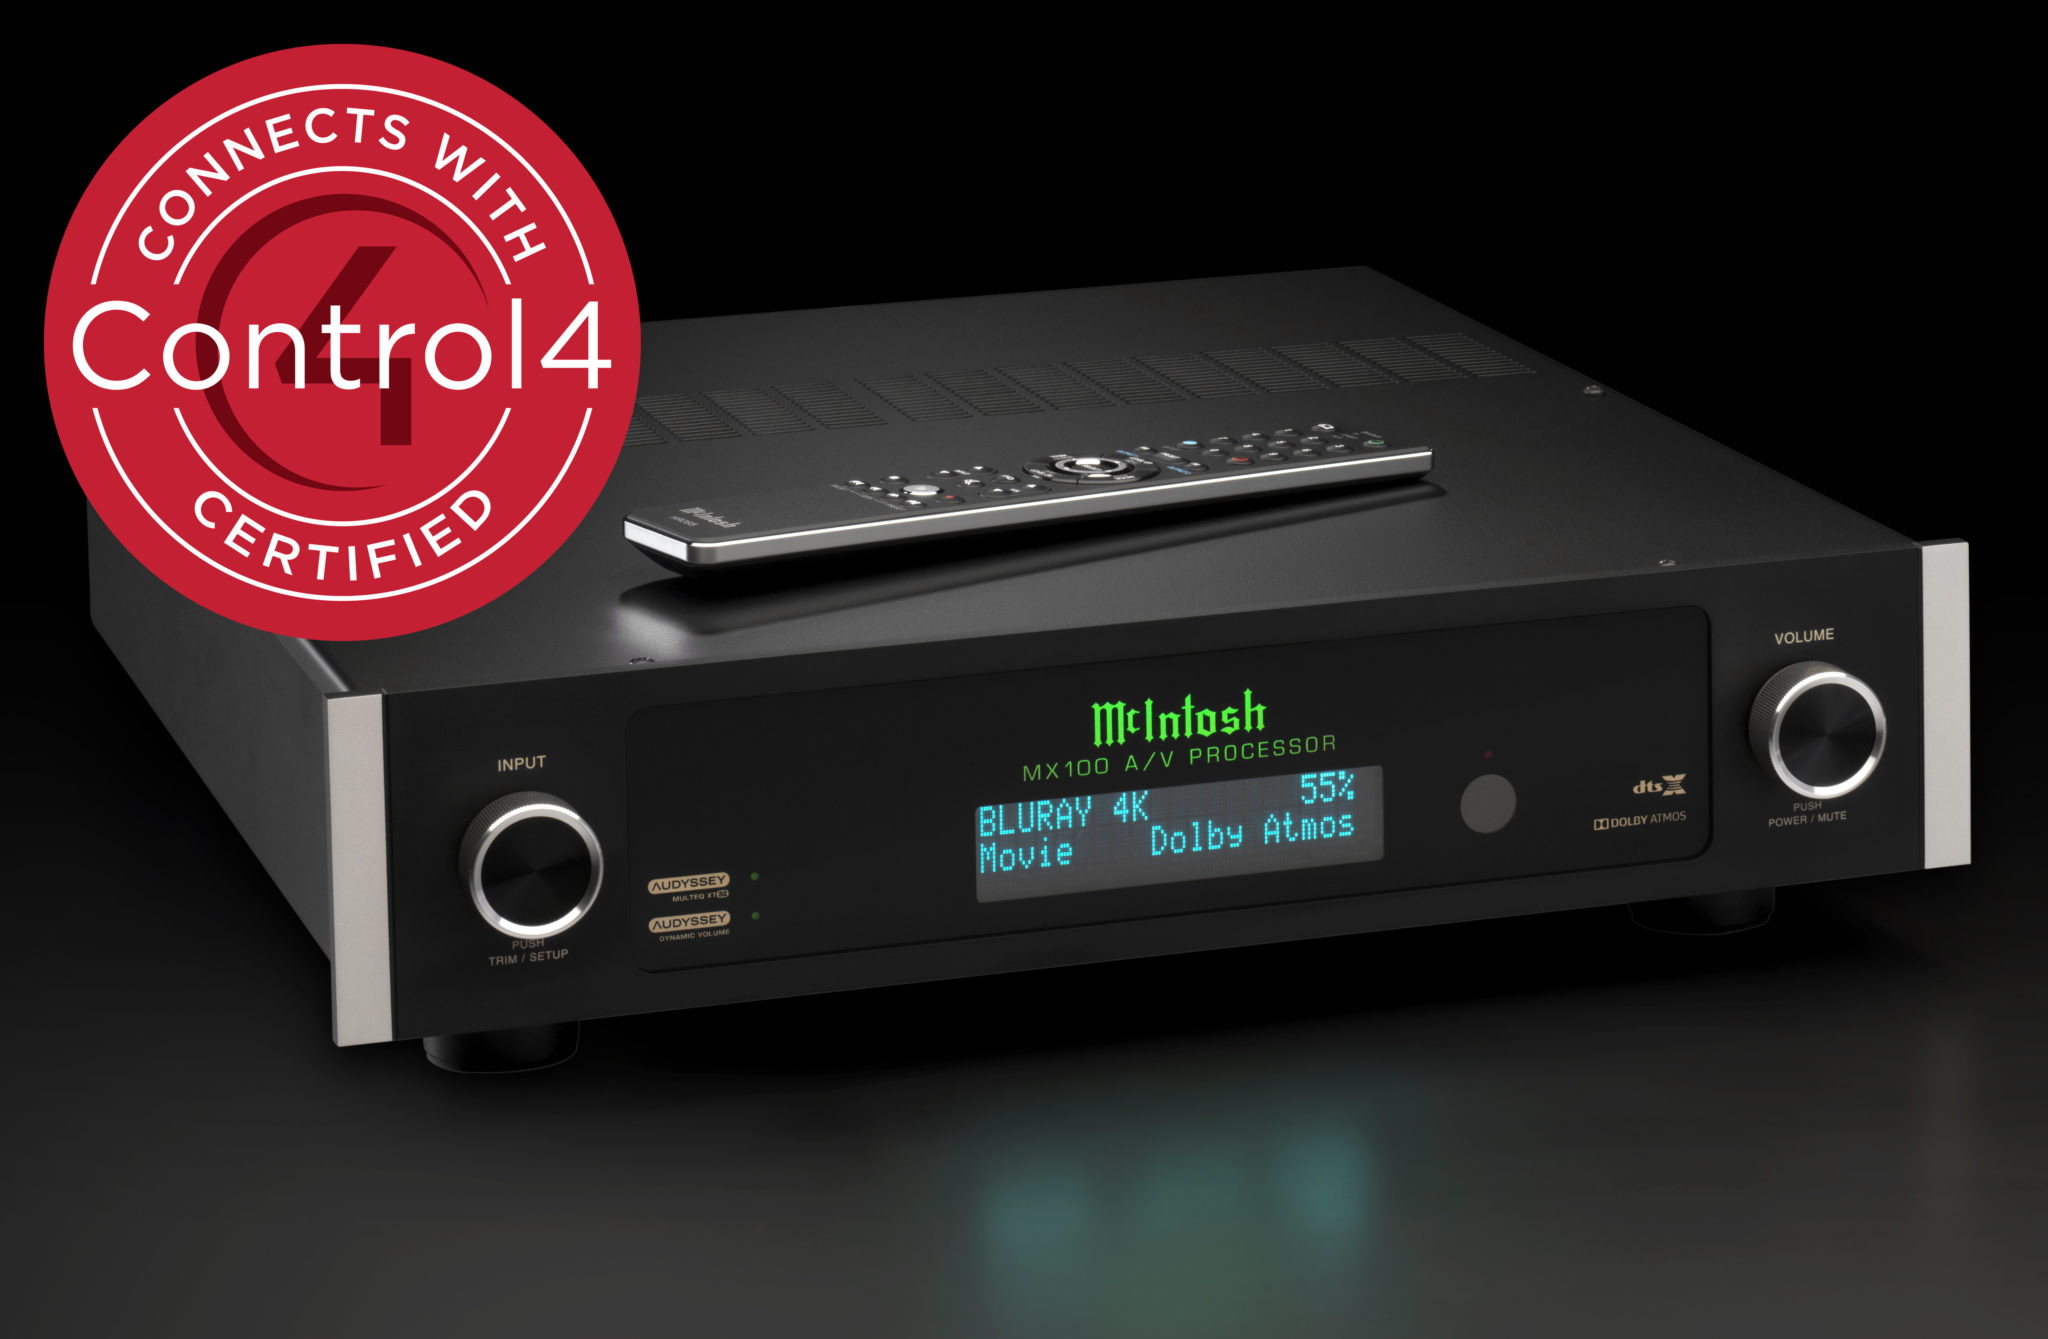 McIntosh MX100 AV Processor Receives Connects with Control4 Certification